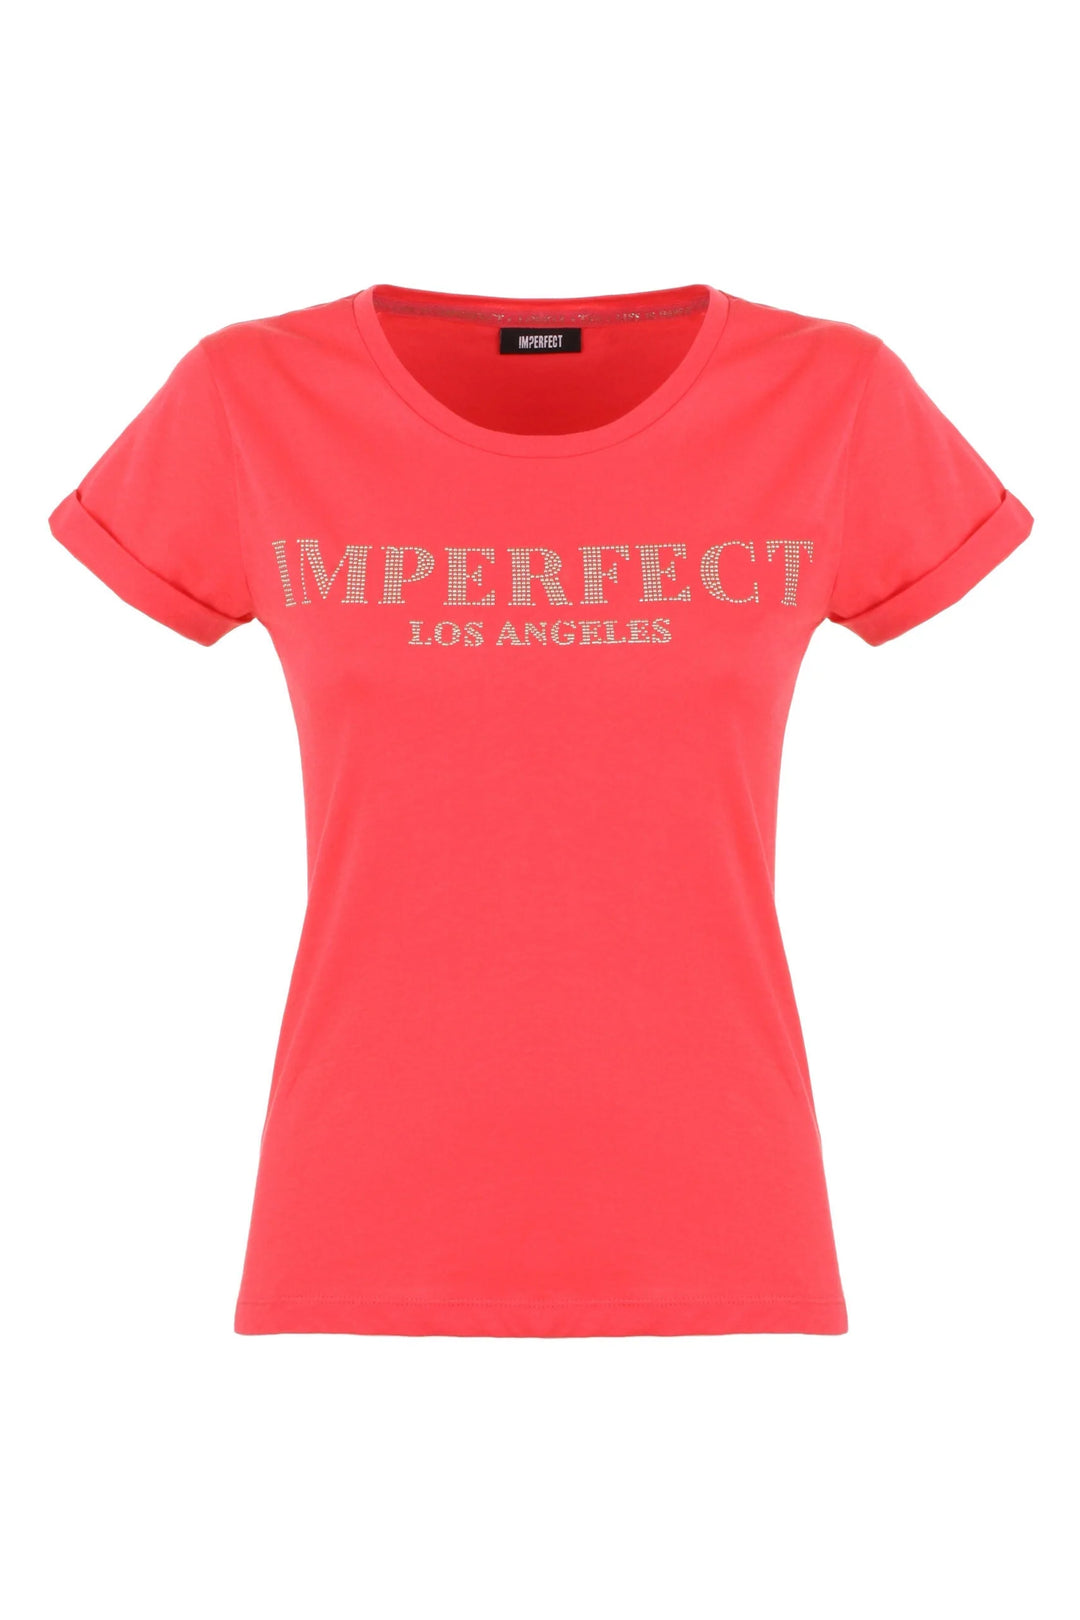 Imperfect Pink Cotton Tops & T-Shirt feed-agegroup-adult, feed-color-Pink, feed-gender-female, Imperfect, Pink, Tops & T-Shirts - Women - Clothing, XS at SEYMAYKA